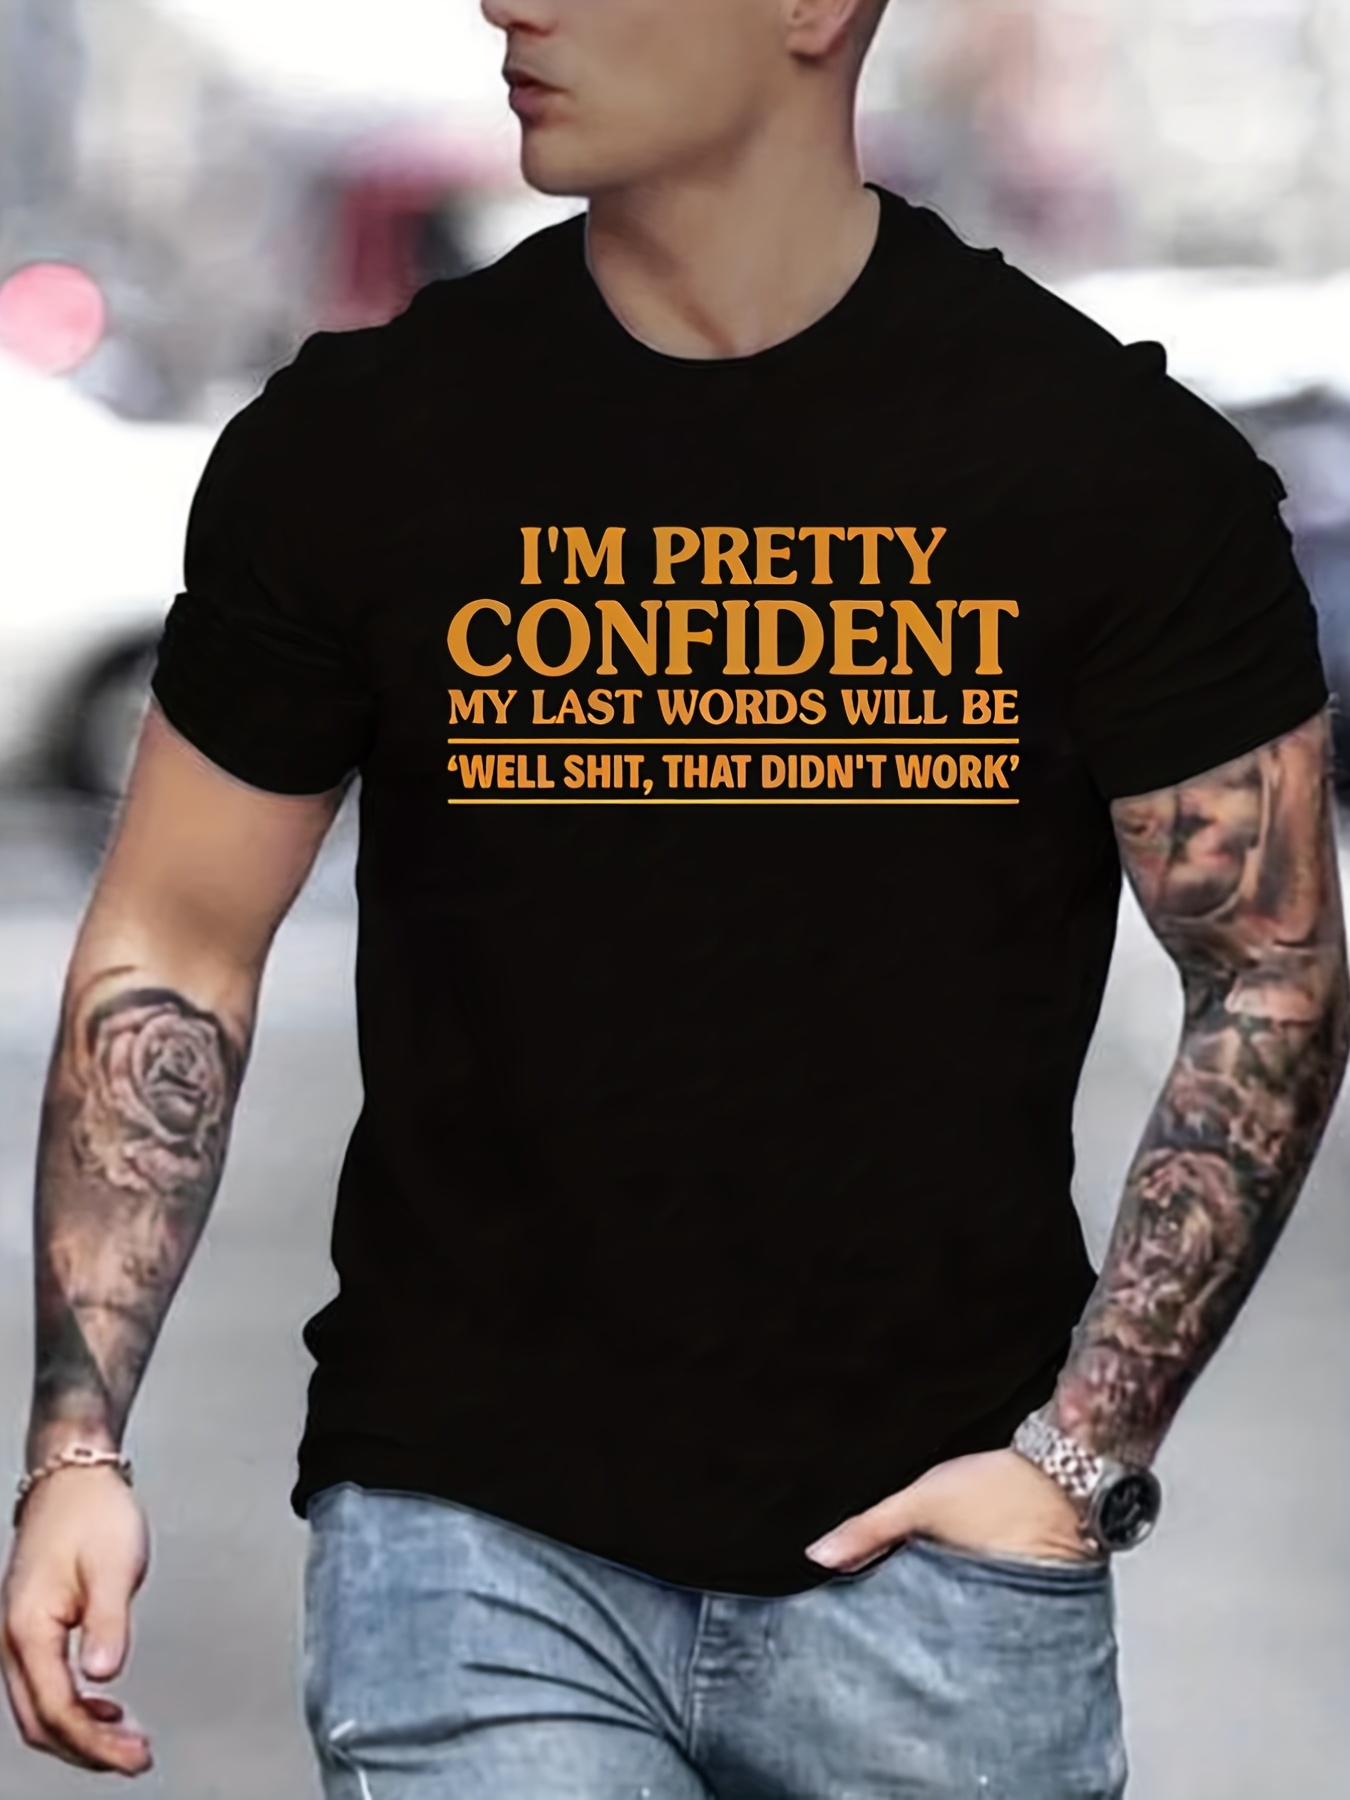 powerful slogan print mens graphic design crew neck t shirt casual comfy tees t shirts for summer mens clothing tops details 38